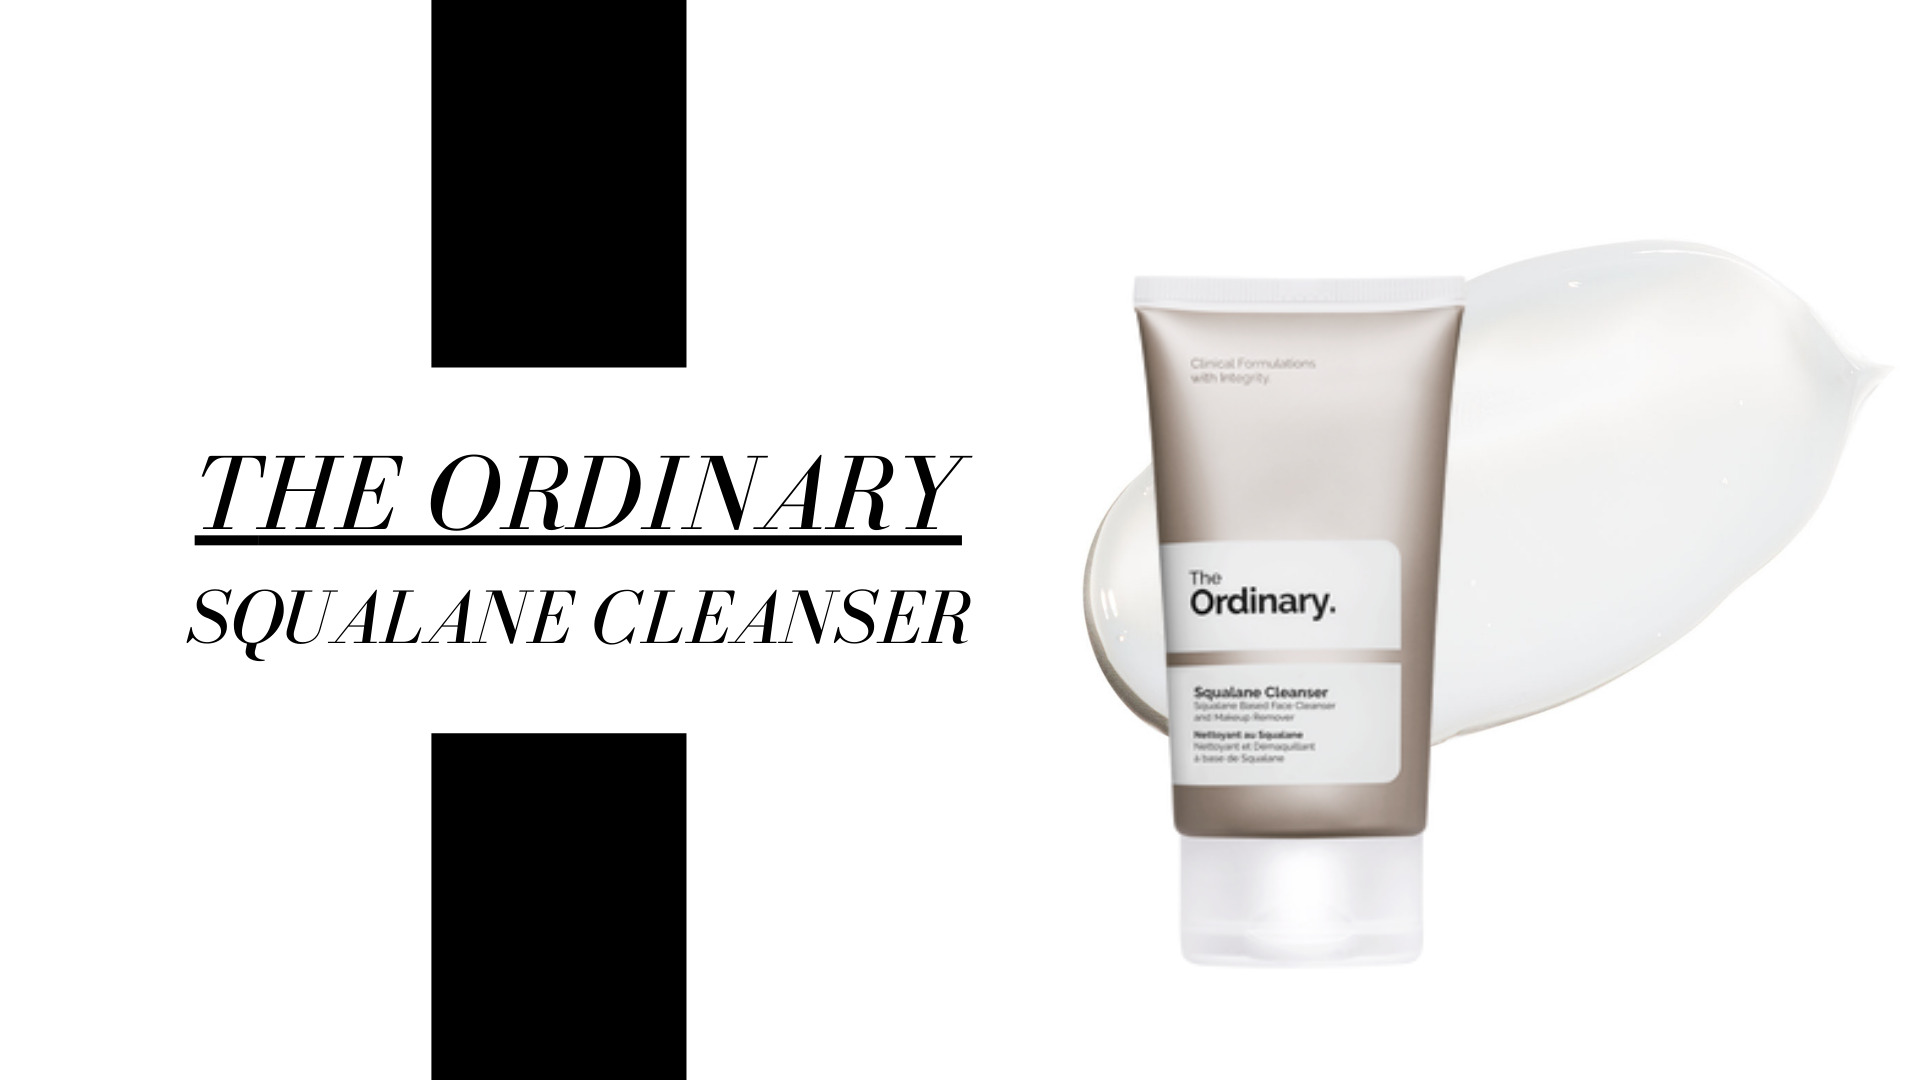 This cleanser from The Ordinary is absolutely amazing. It has a cream formula that melts and transforms in oil, making the cleansing so gentle and moisturizing! This cleanser works with all skin types, which is always nice! Plus, this product is also vegan, cruelty-free, and gluten-free.